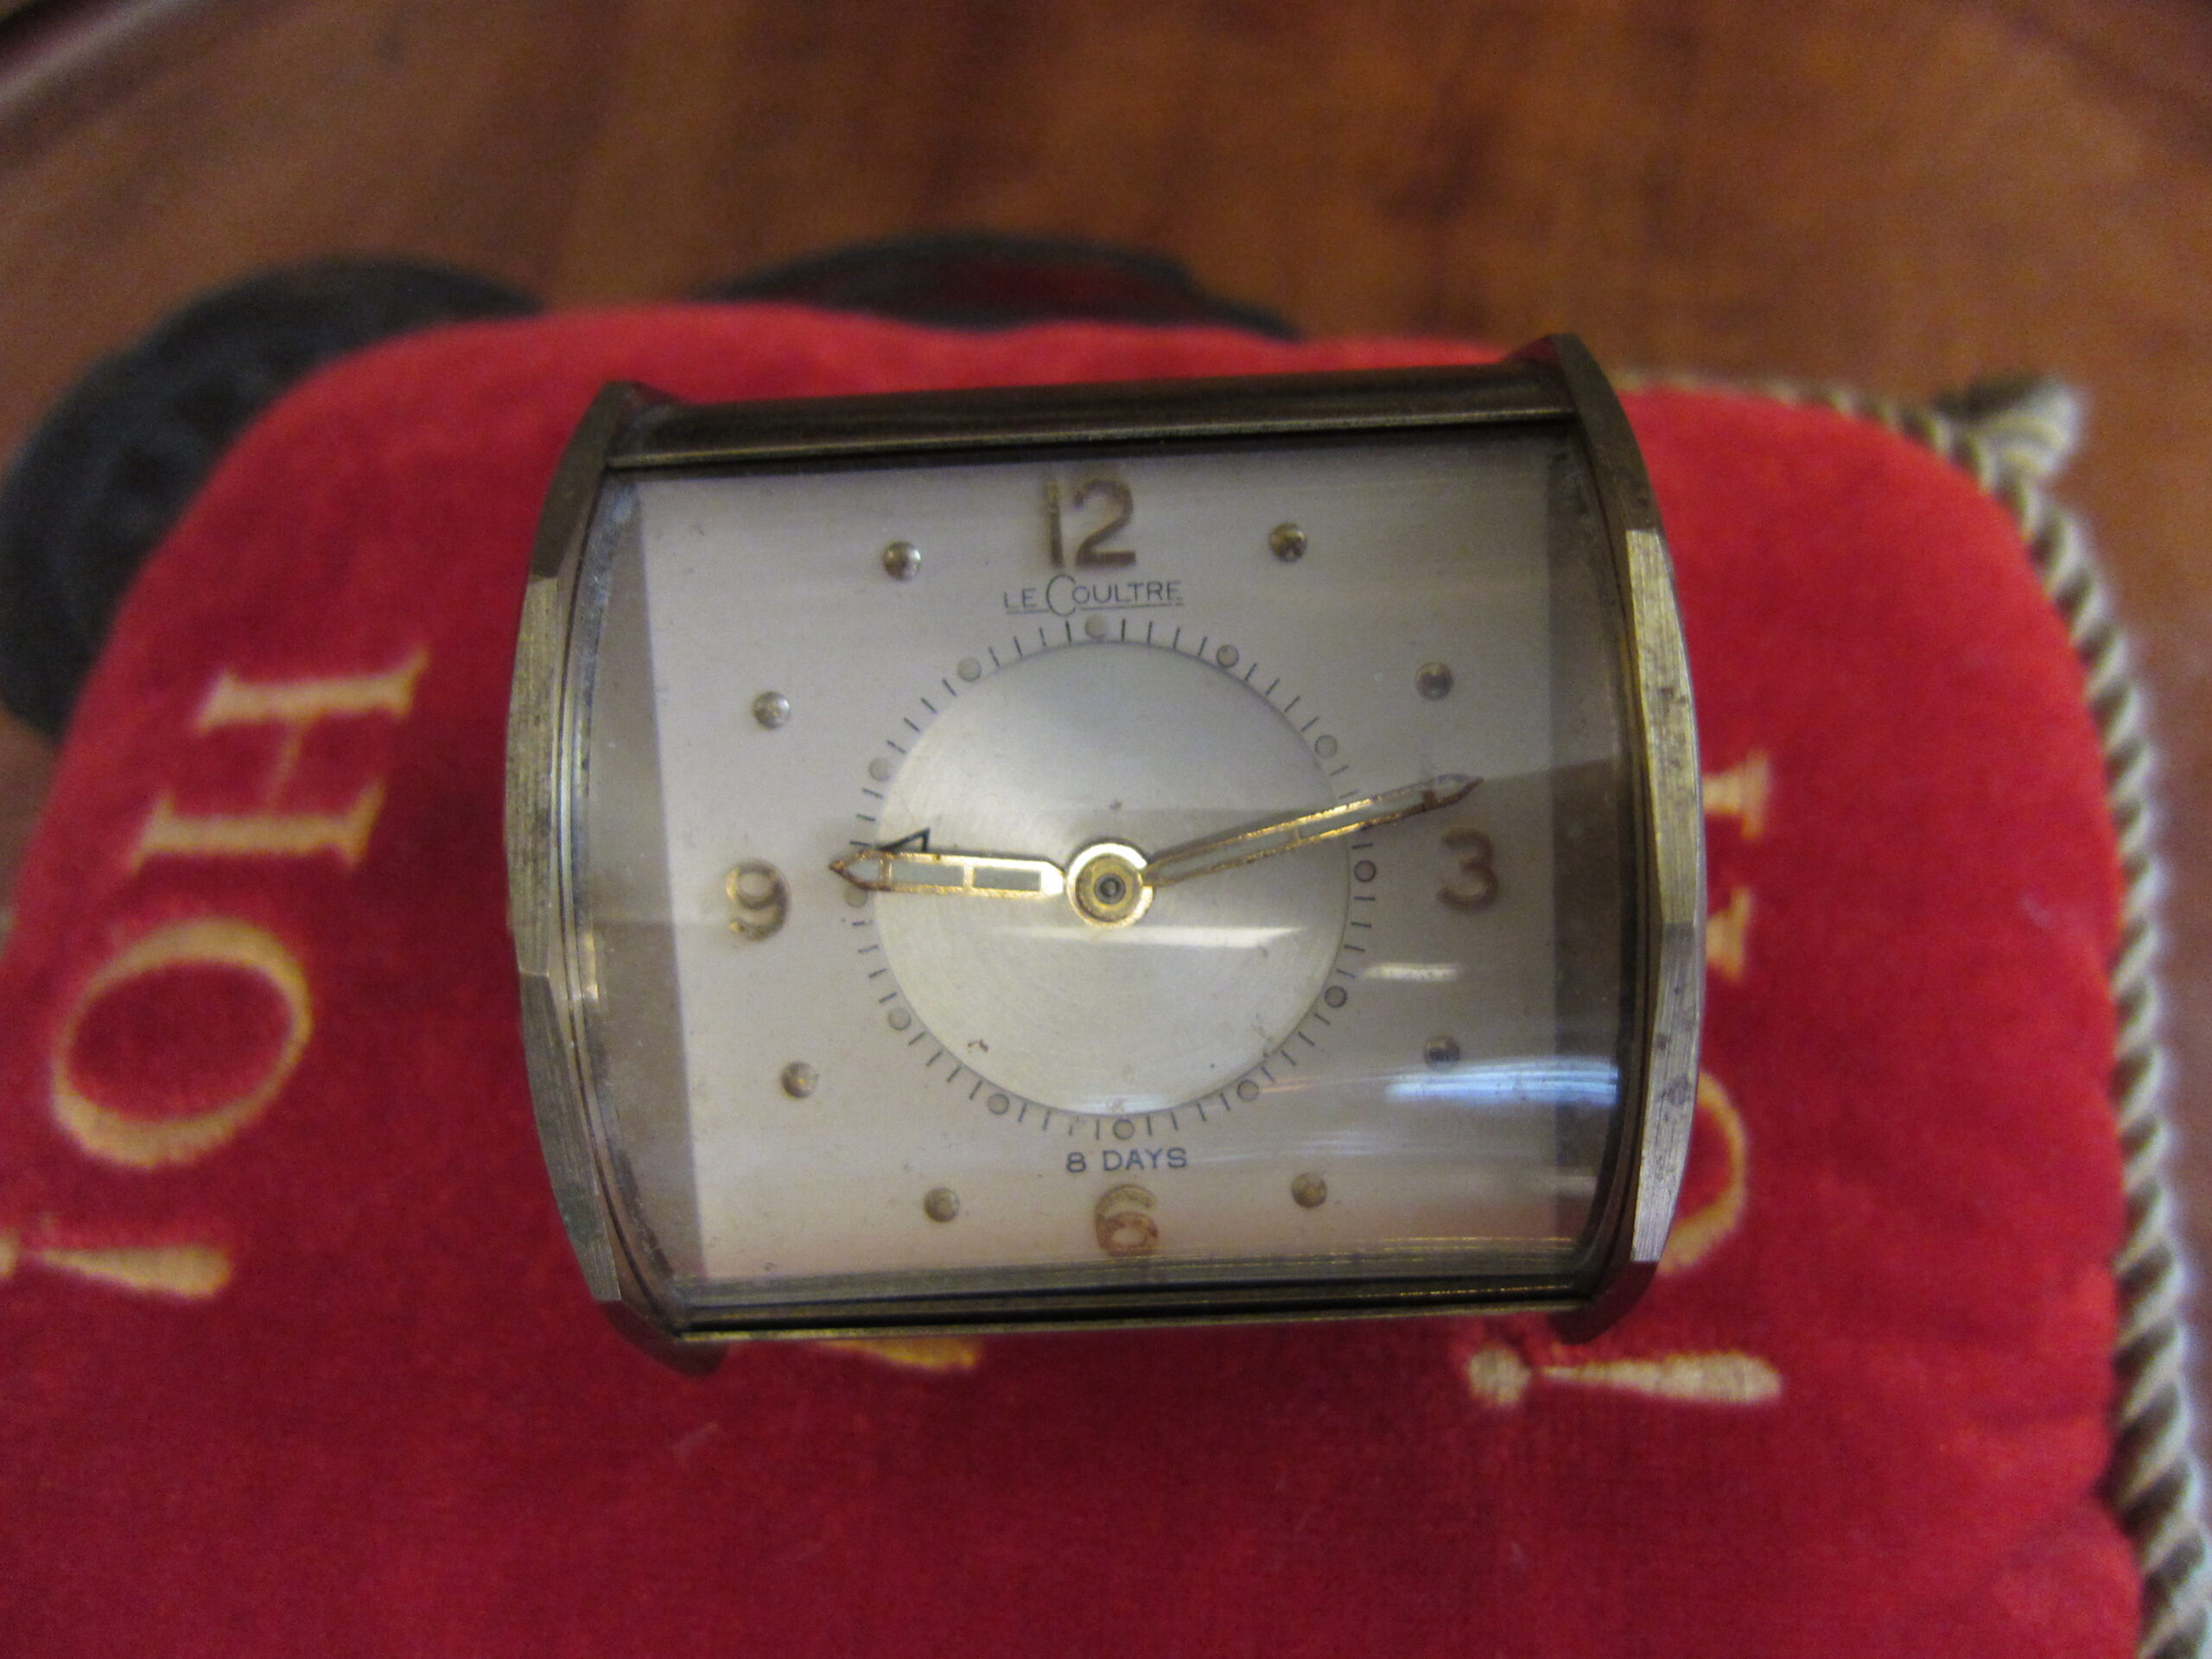 LeCoultre 8 Day Travel Alarm Clock, Swiss Made, Number 53